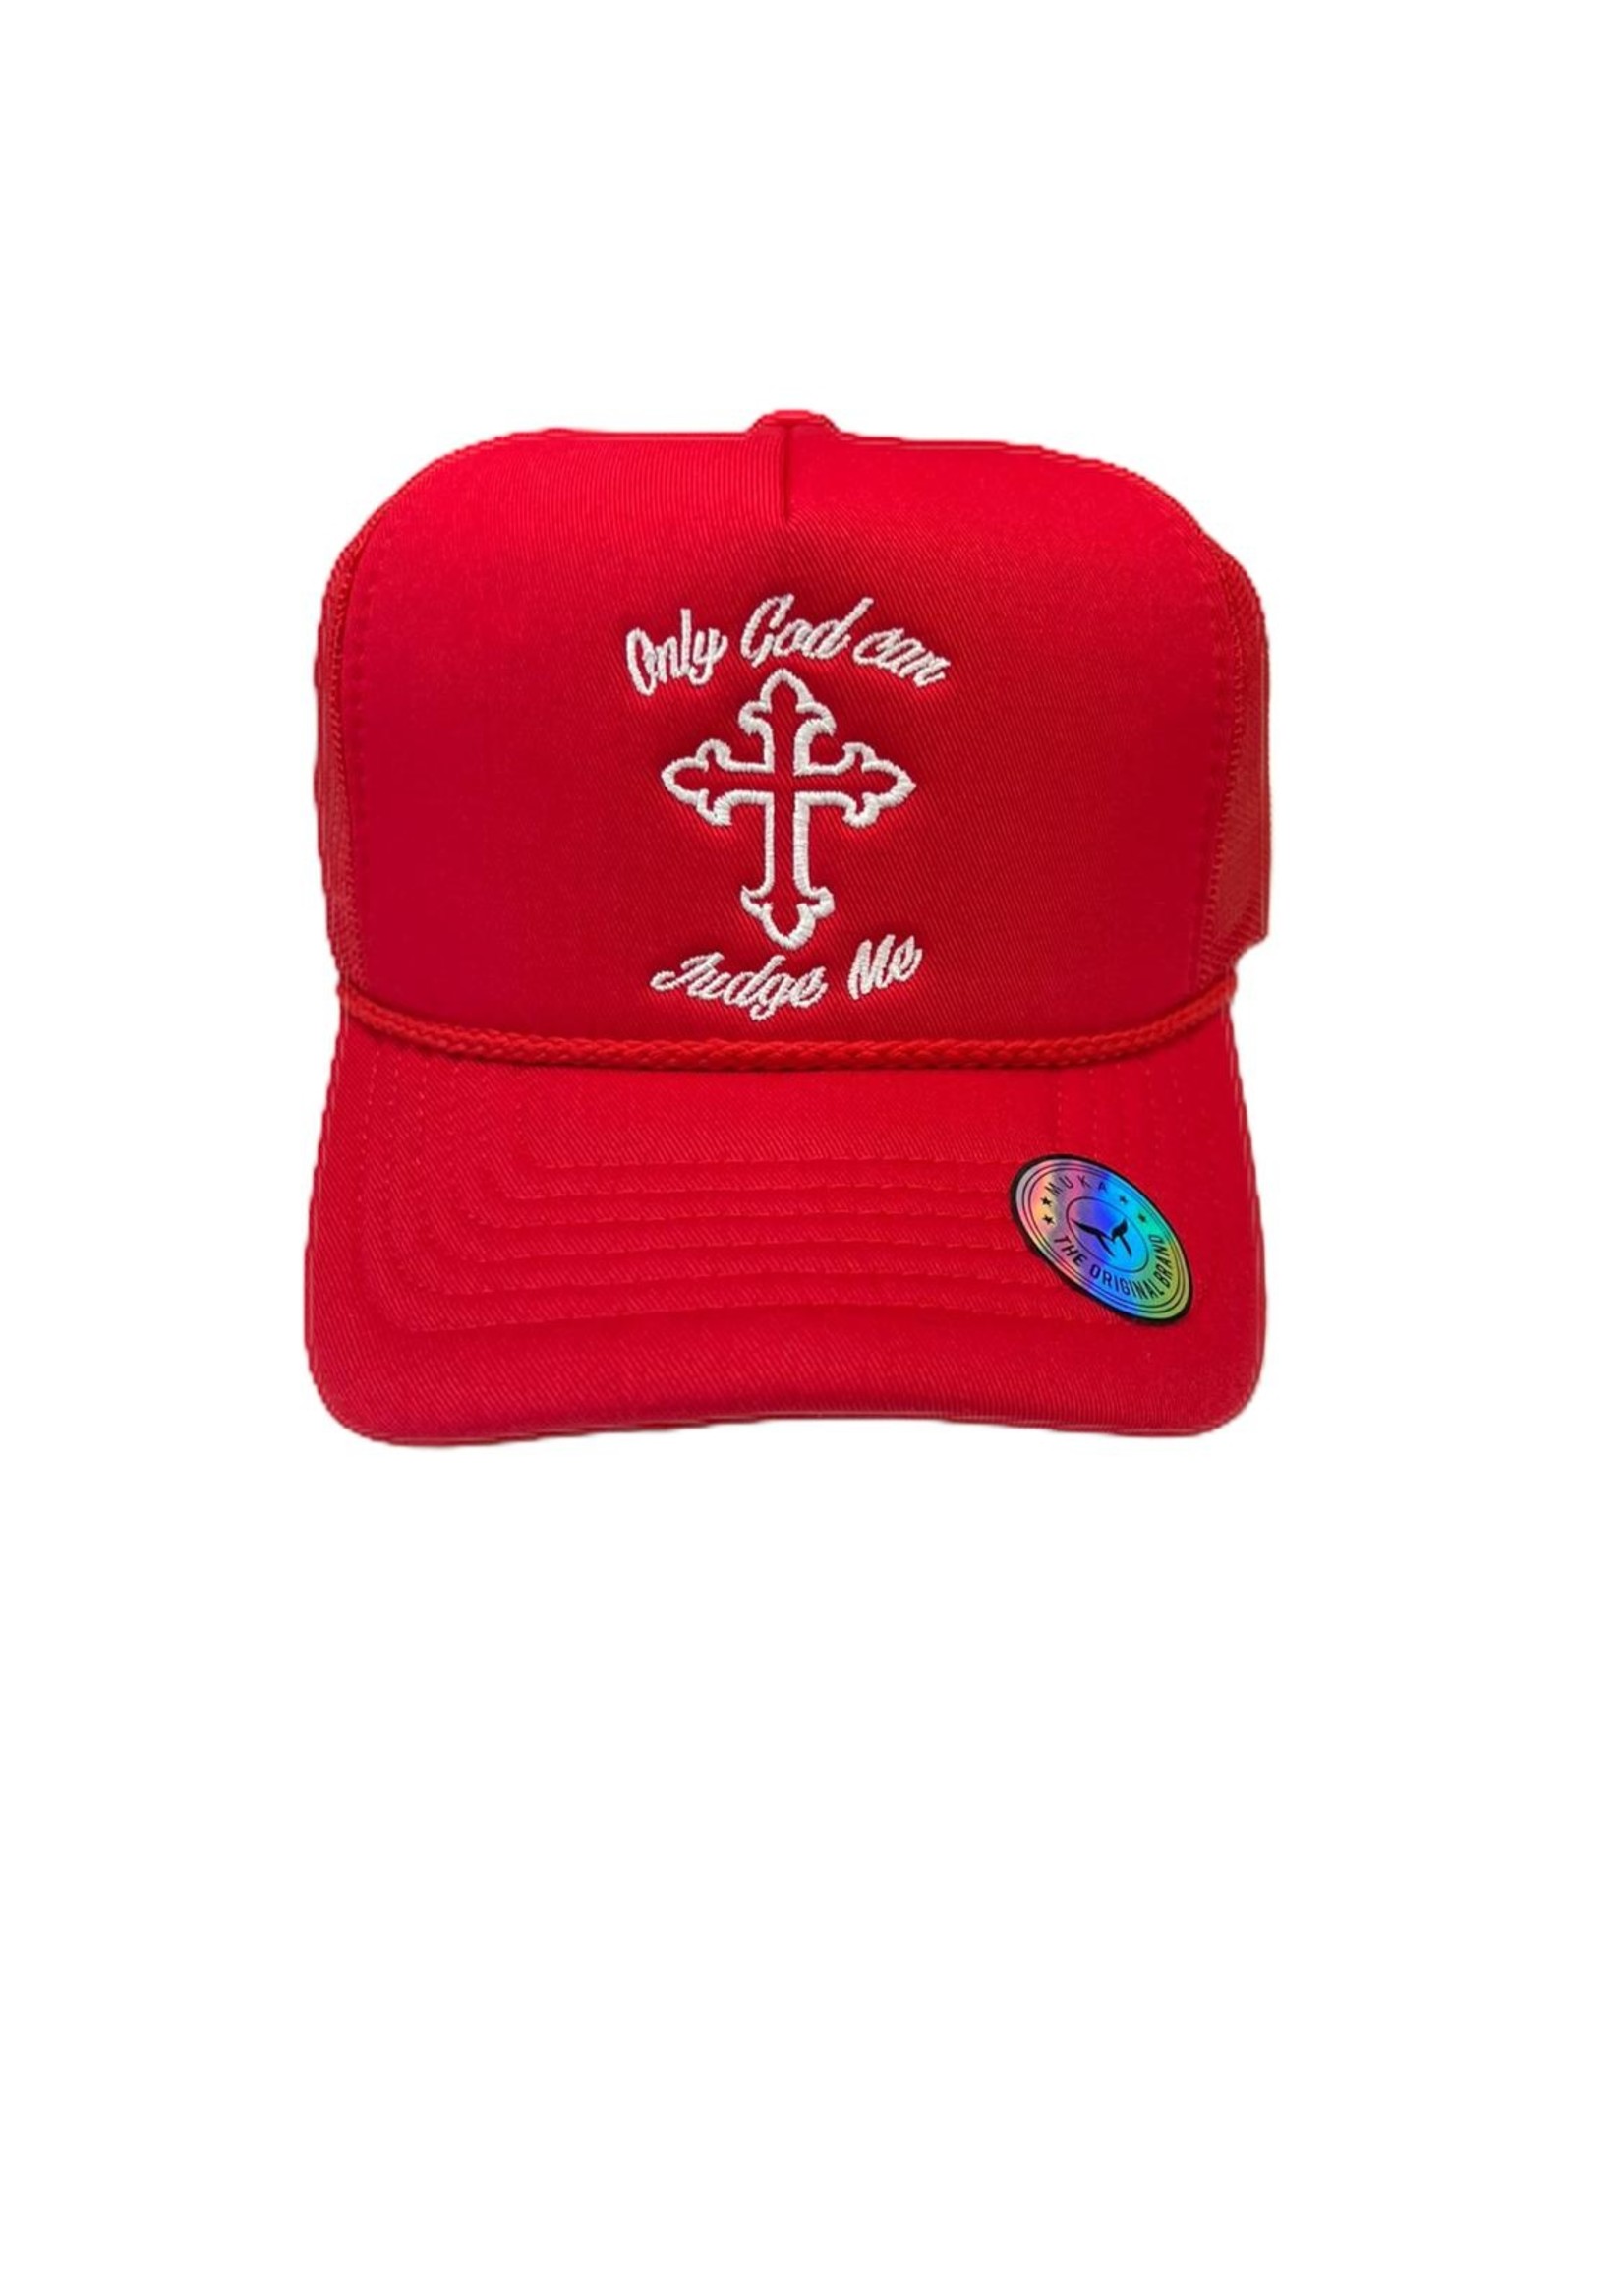 MUKA MUKA "ONLY GOD CAN JUDGE ME" TRUCKER HAT (Red)